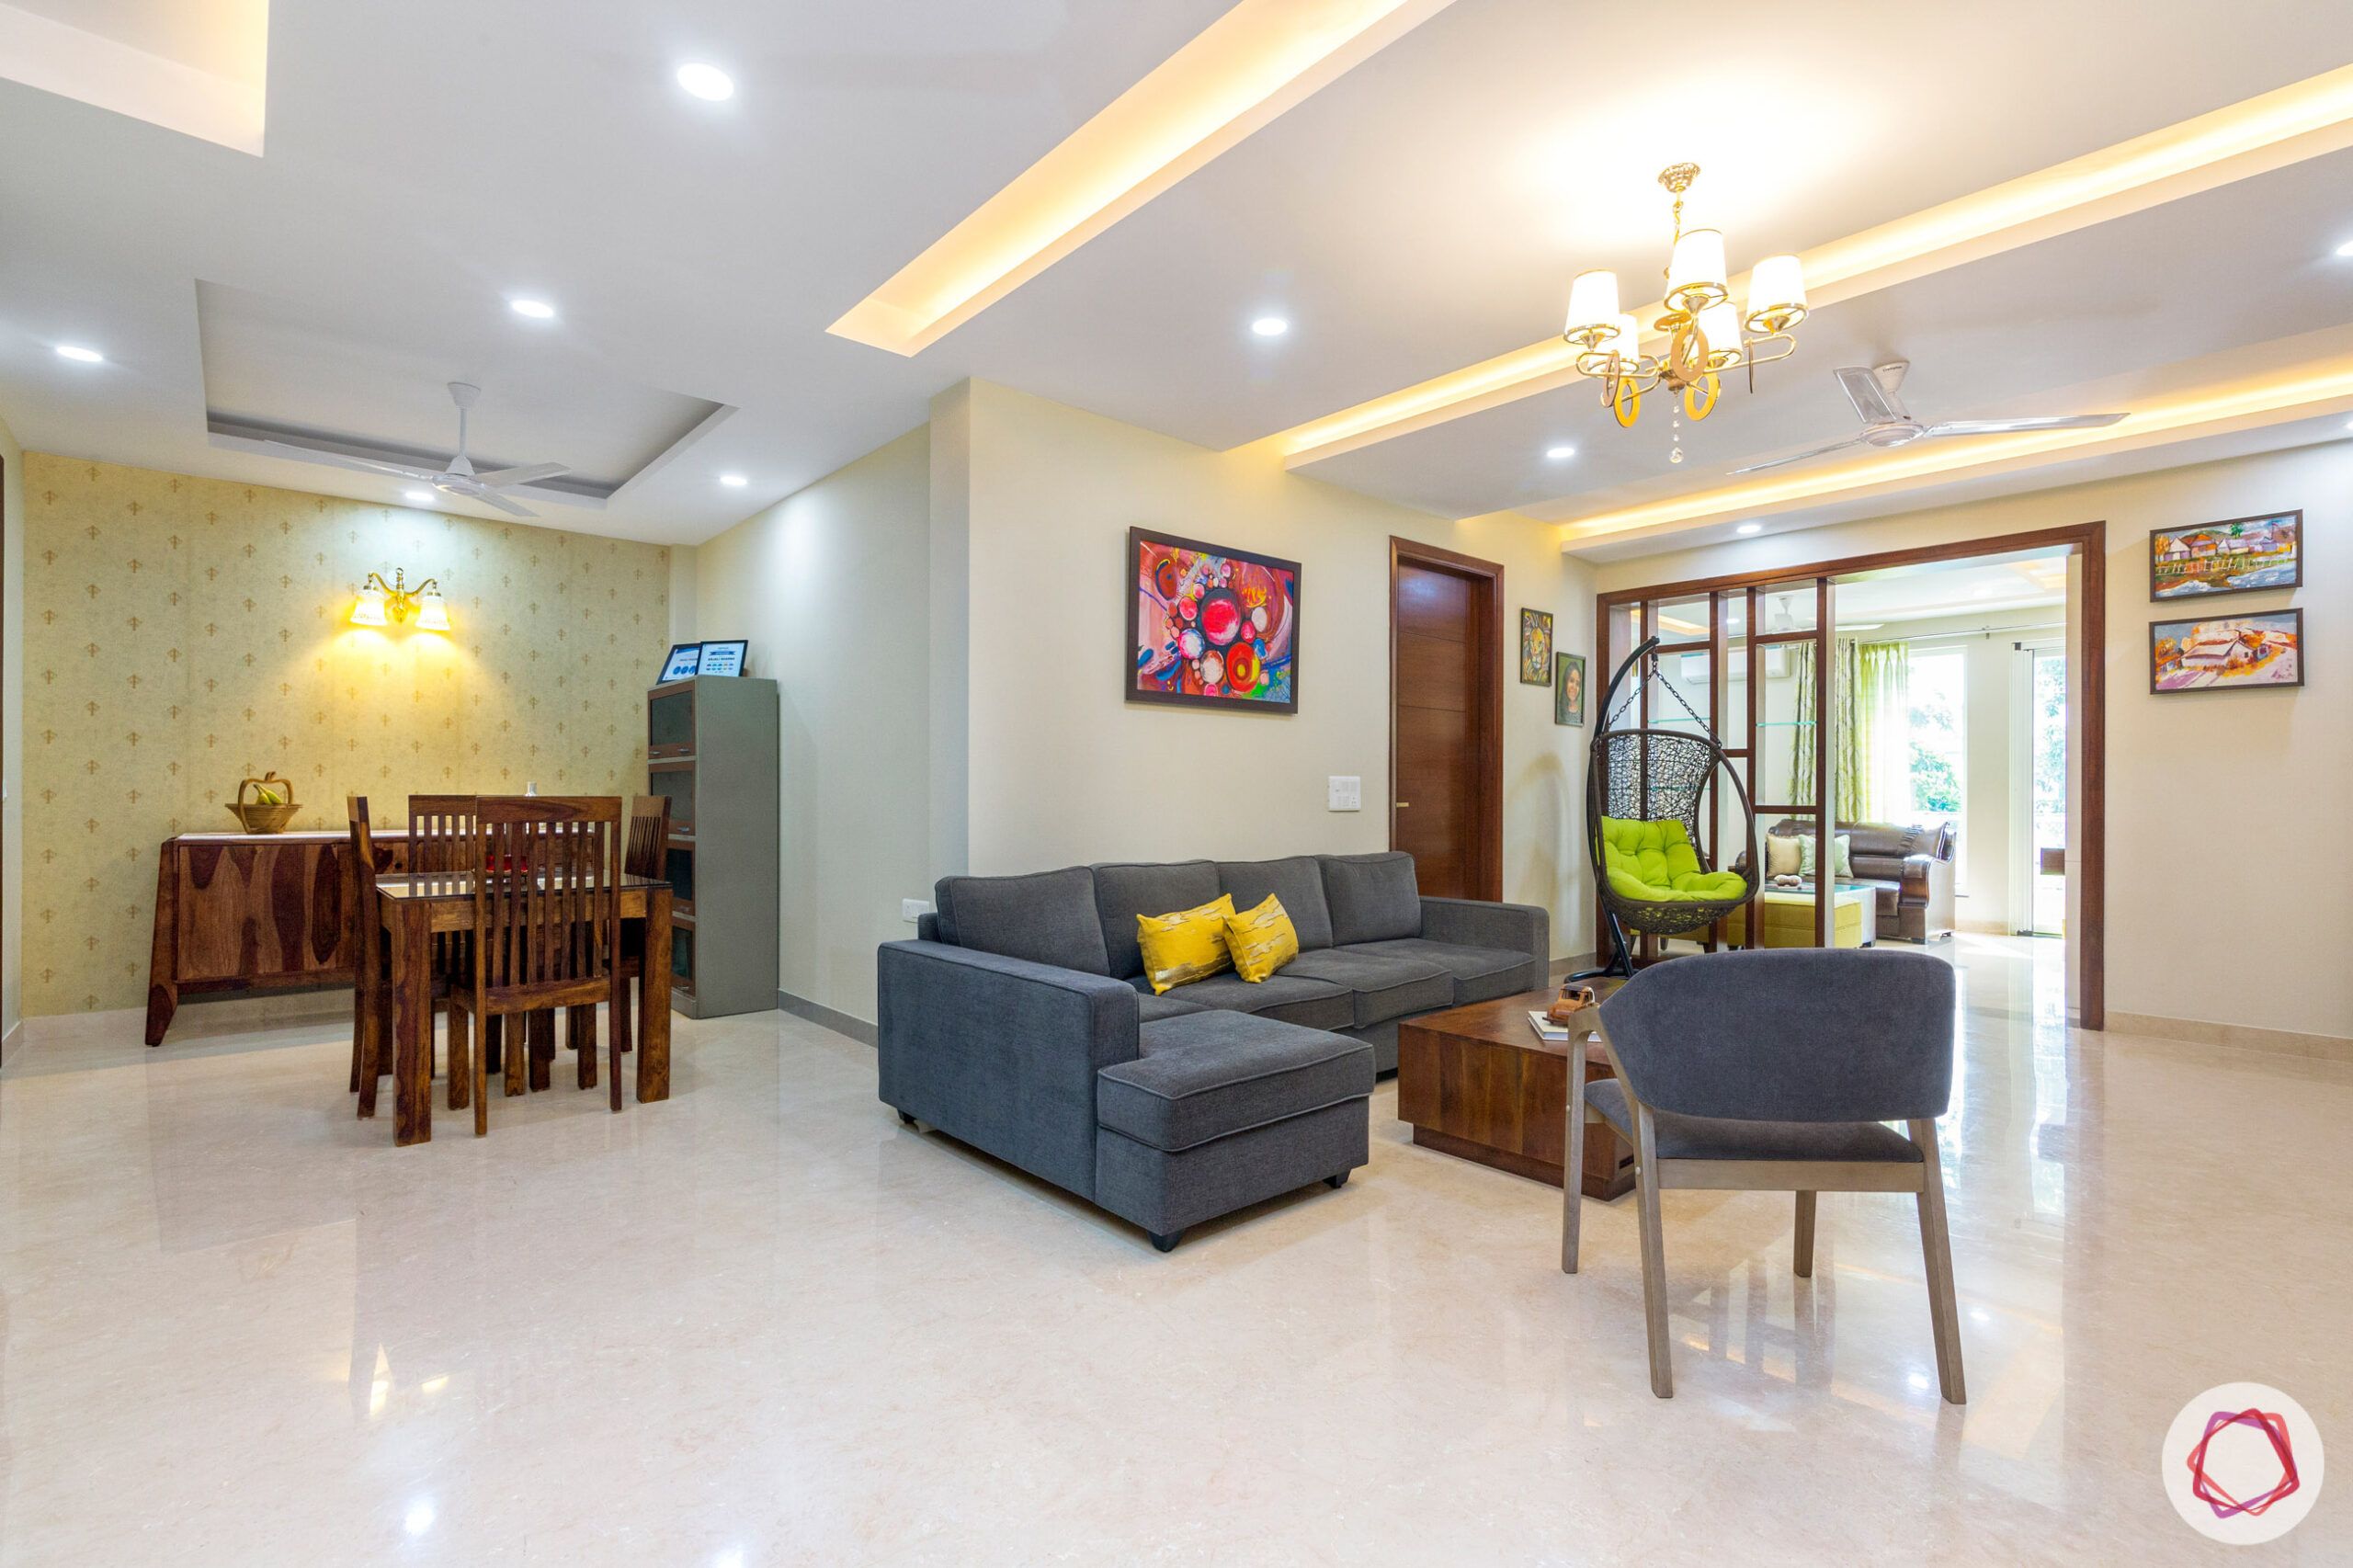 interior-in-gurgaon-opening-image-open-layout